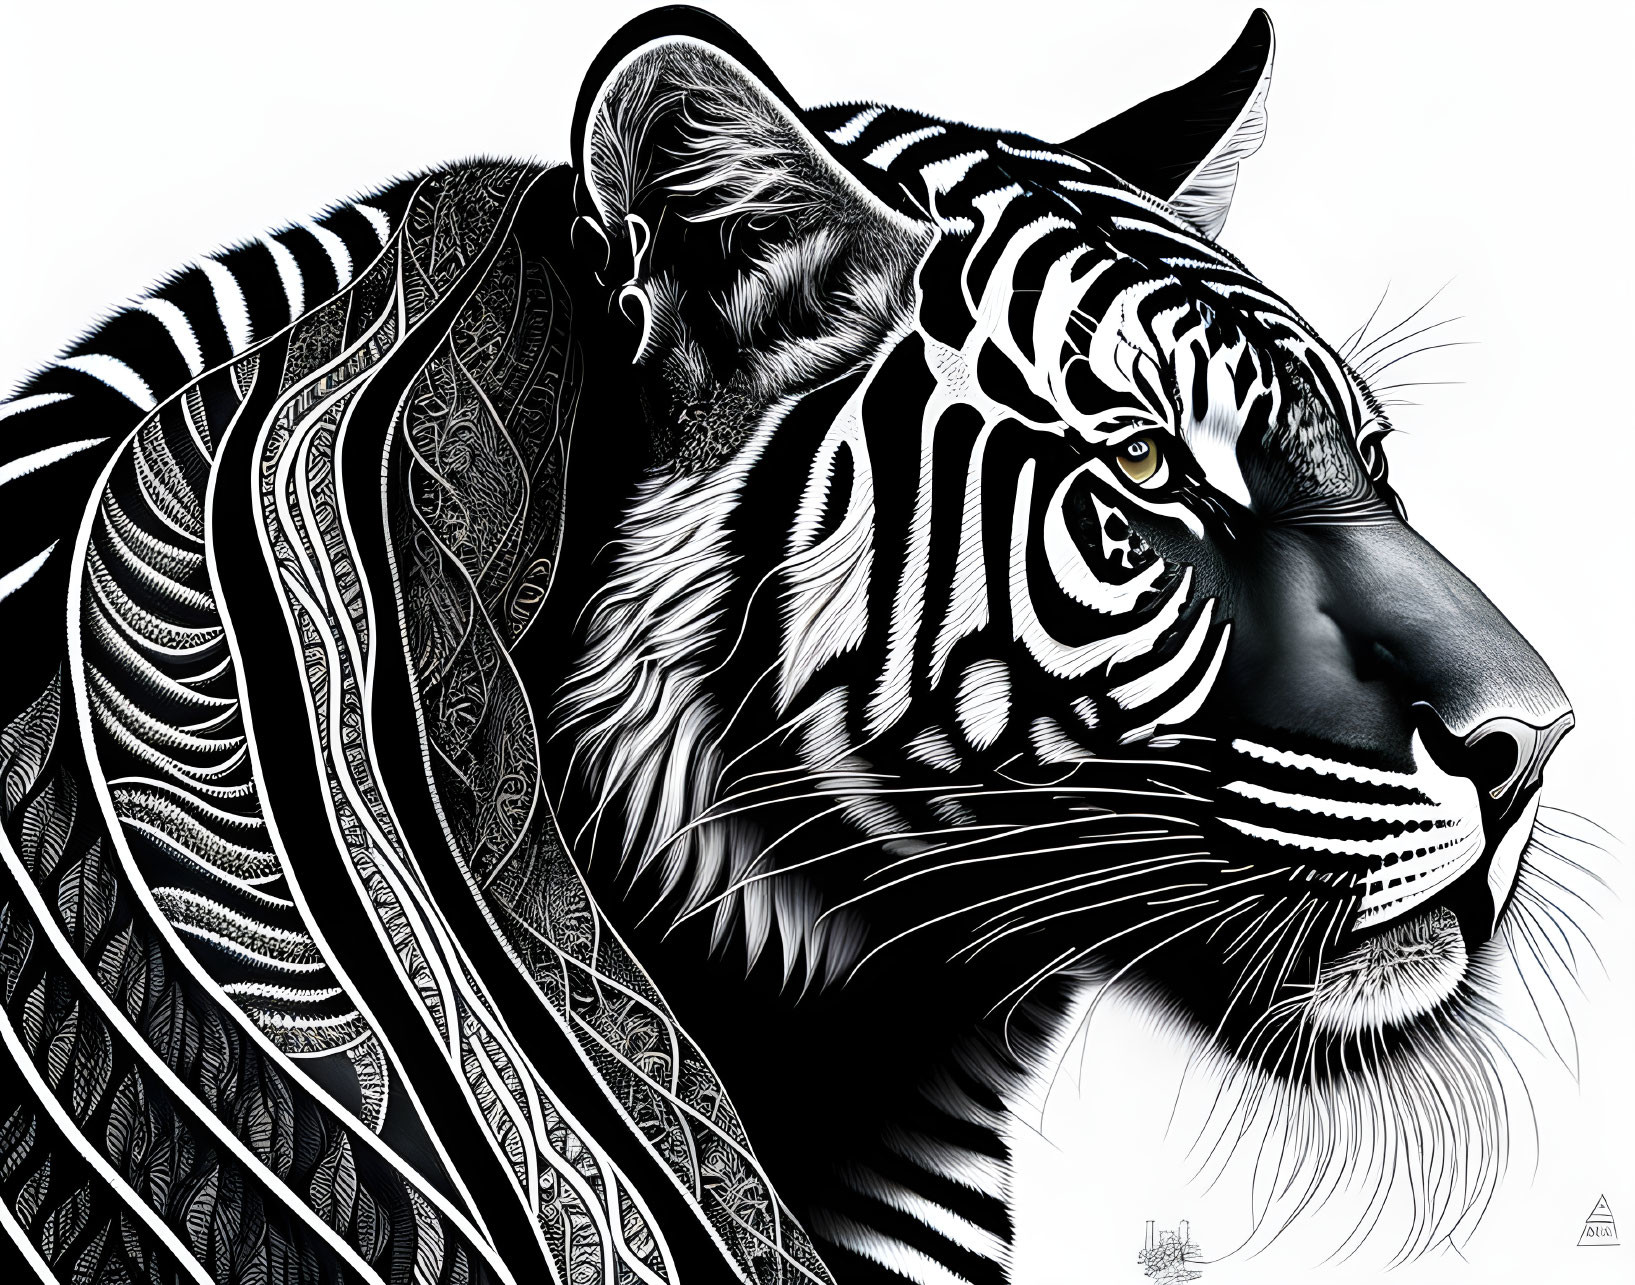 Detailed Black and White Tiger Illustration with Intricate Patterns